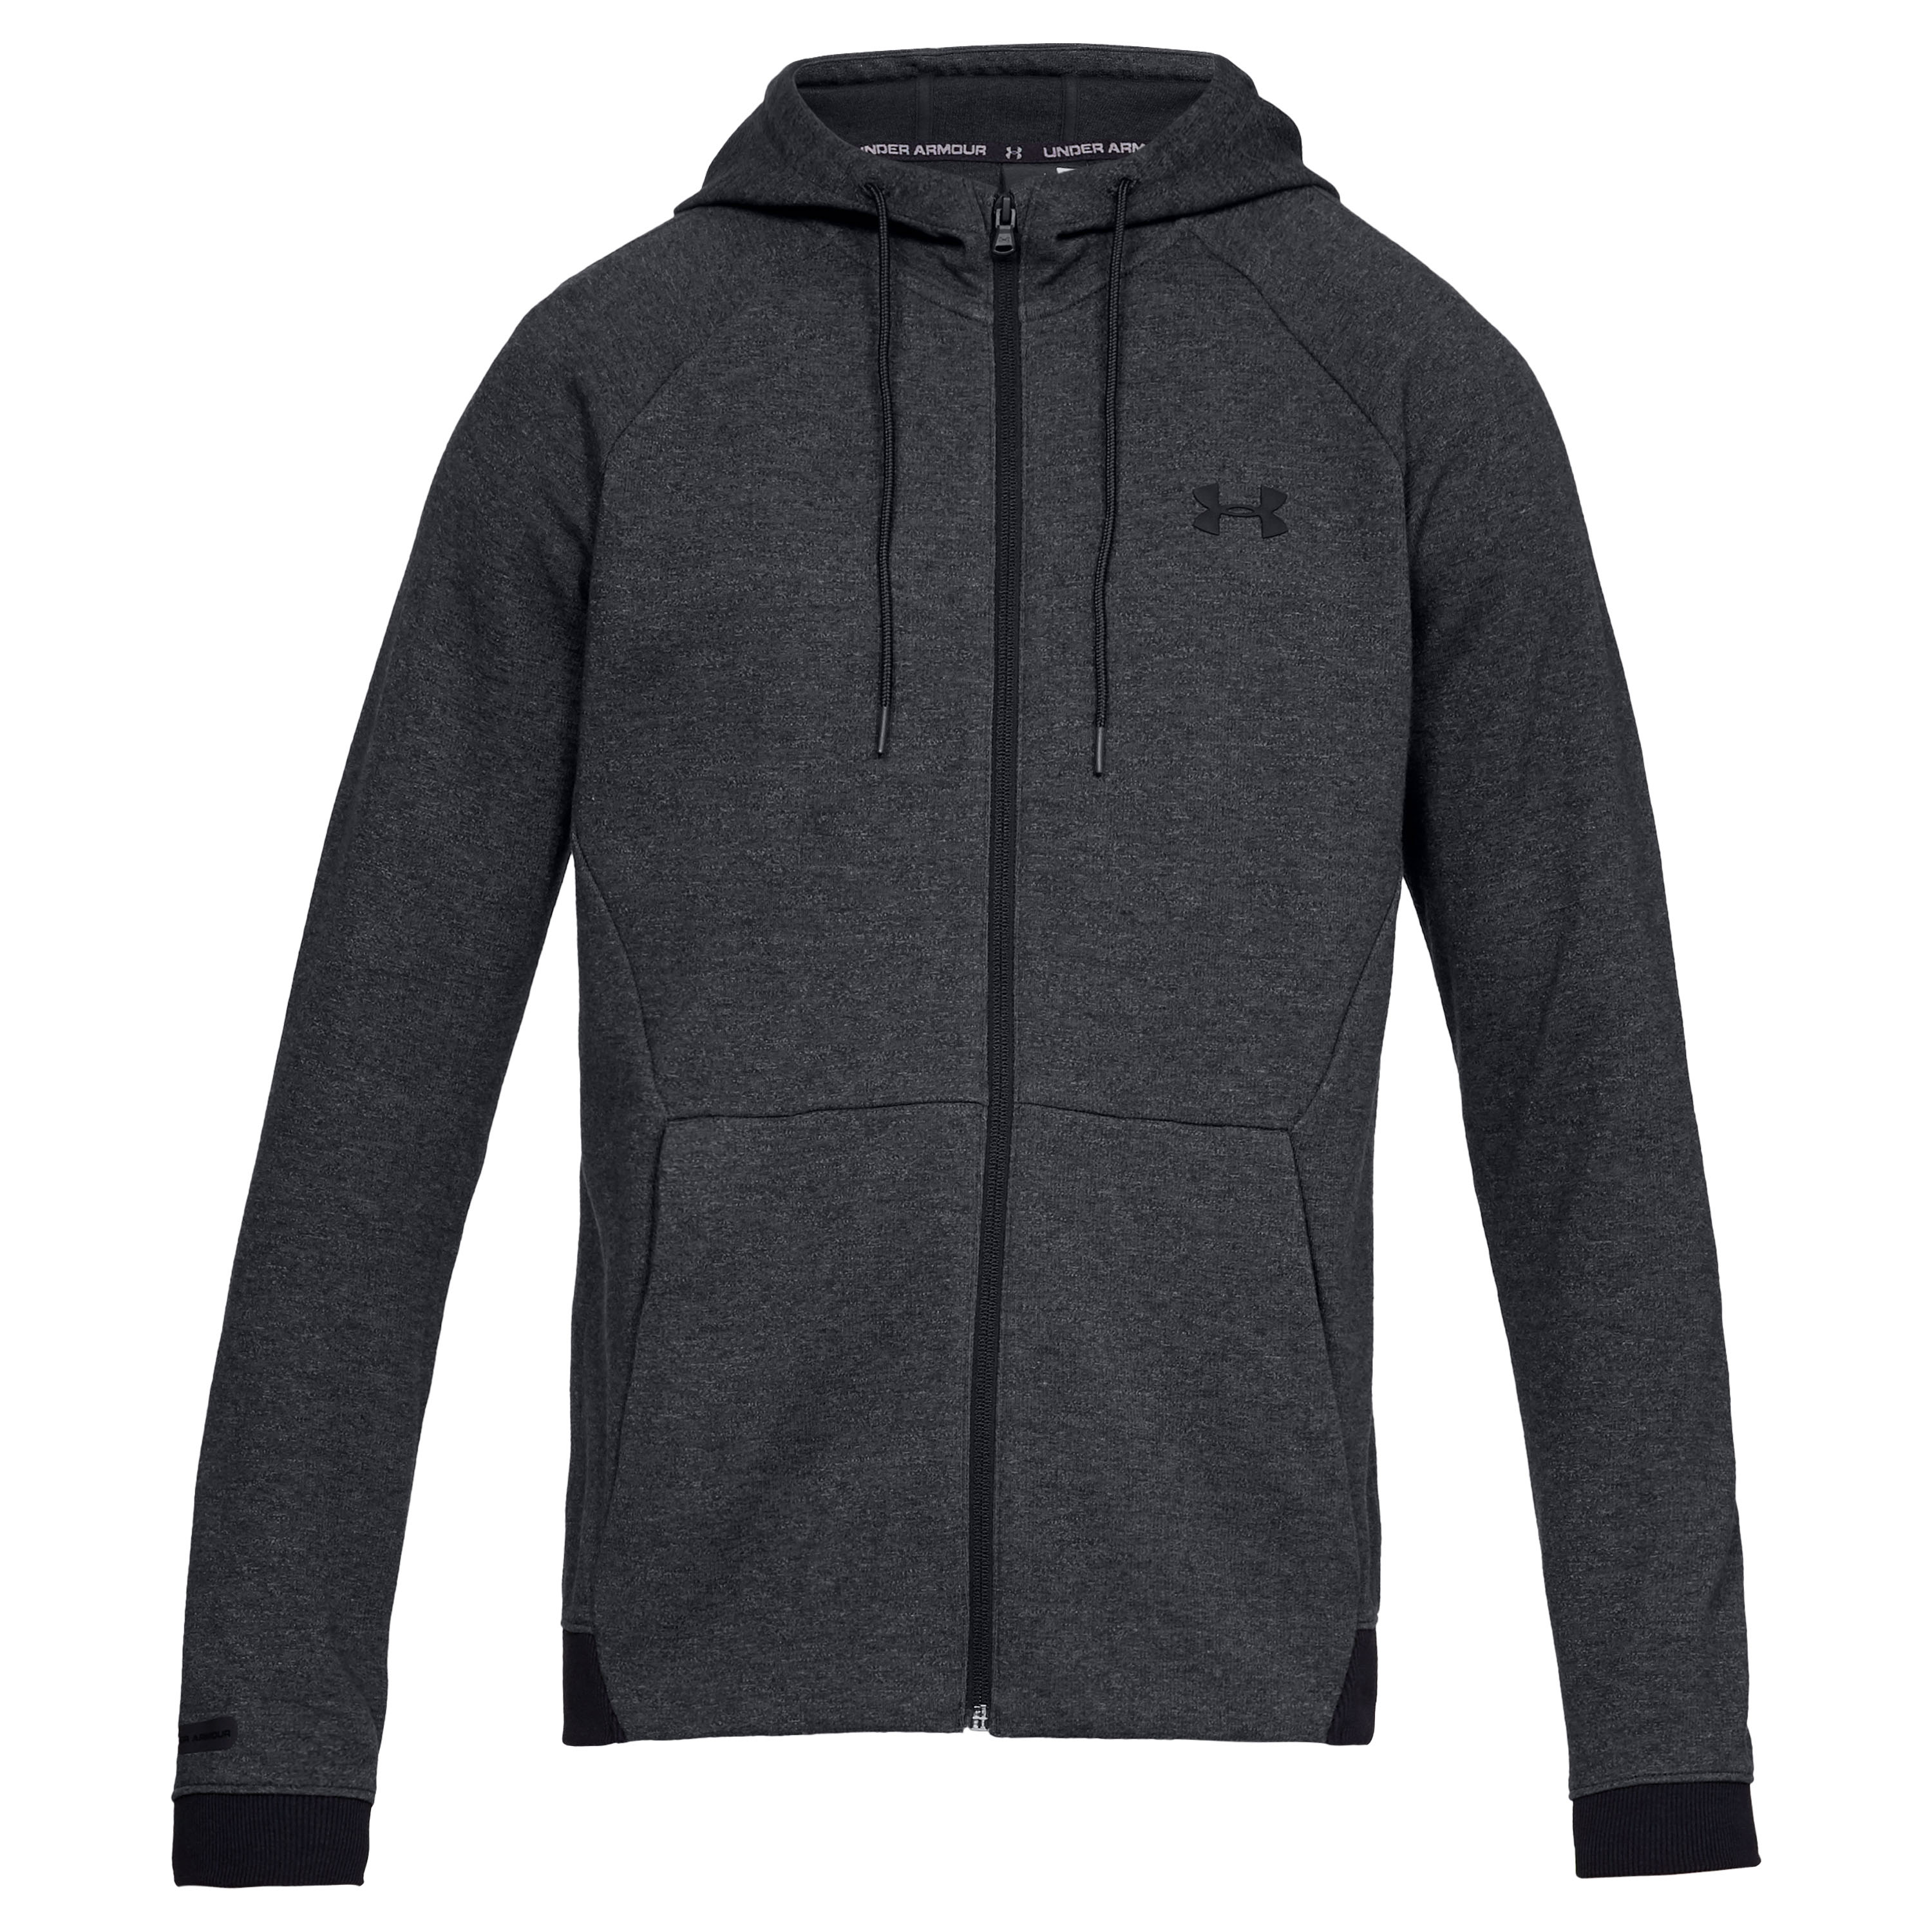 where can i buy under armour hoodies